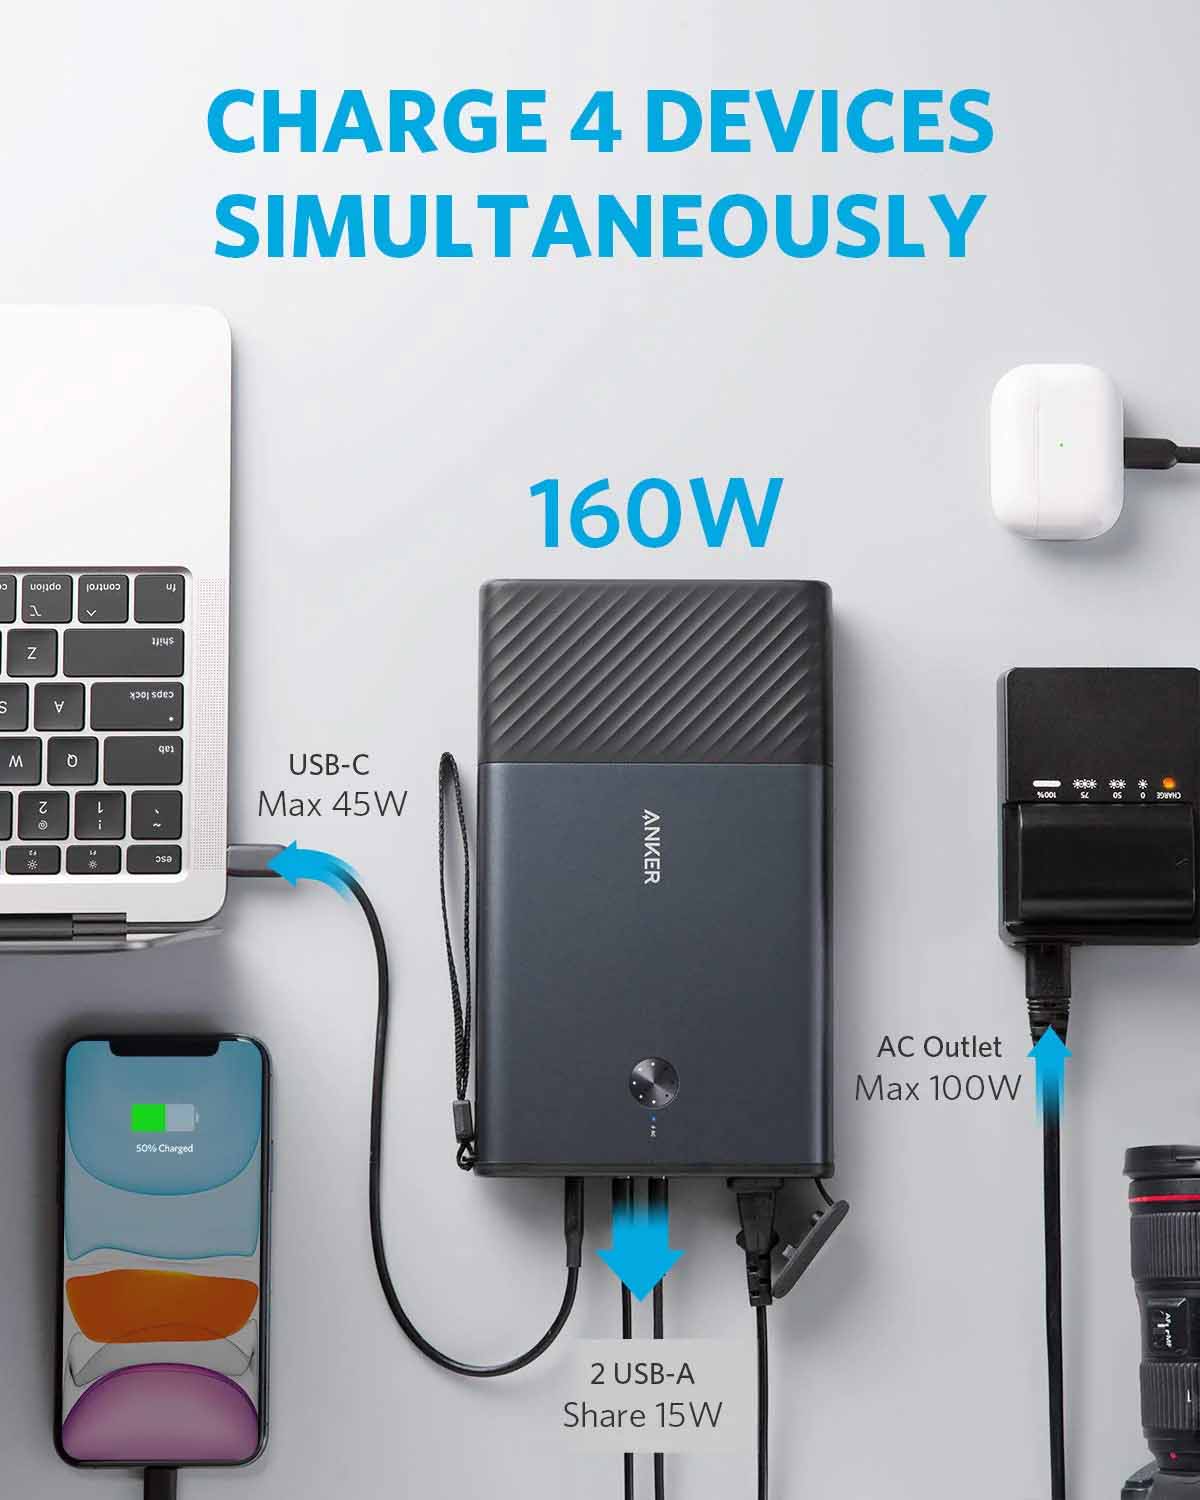 The The Anker 511 PowerHouse 90W Portable Charger Charges 4 Devices Simultaneously